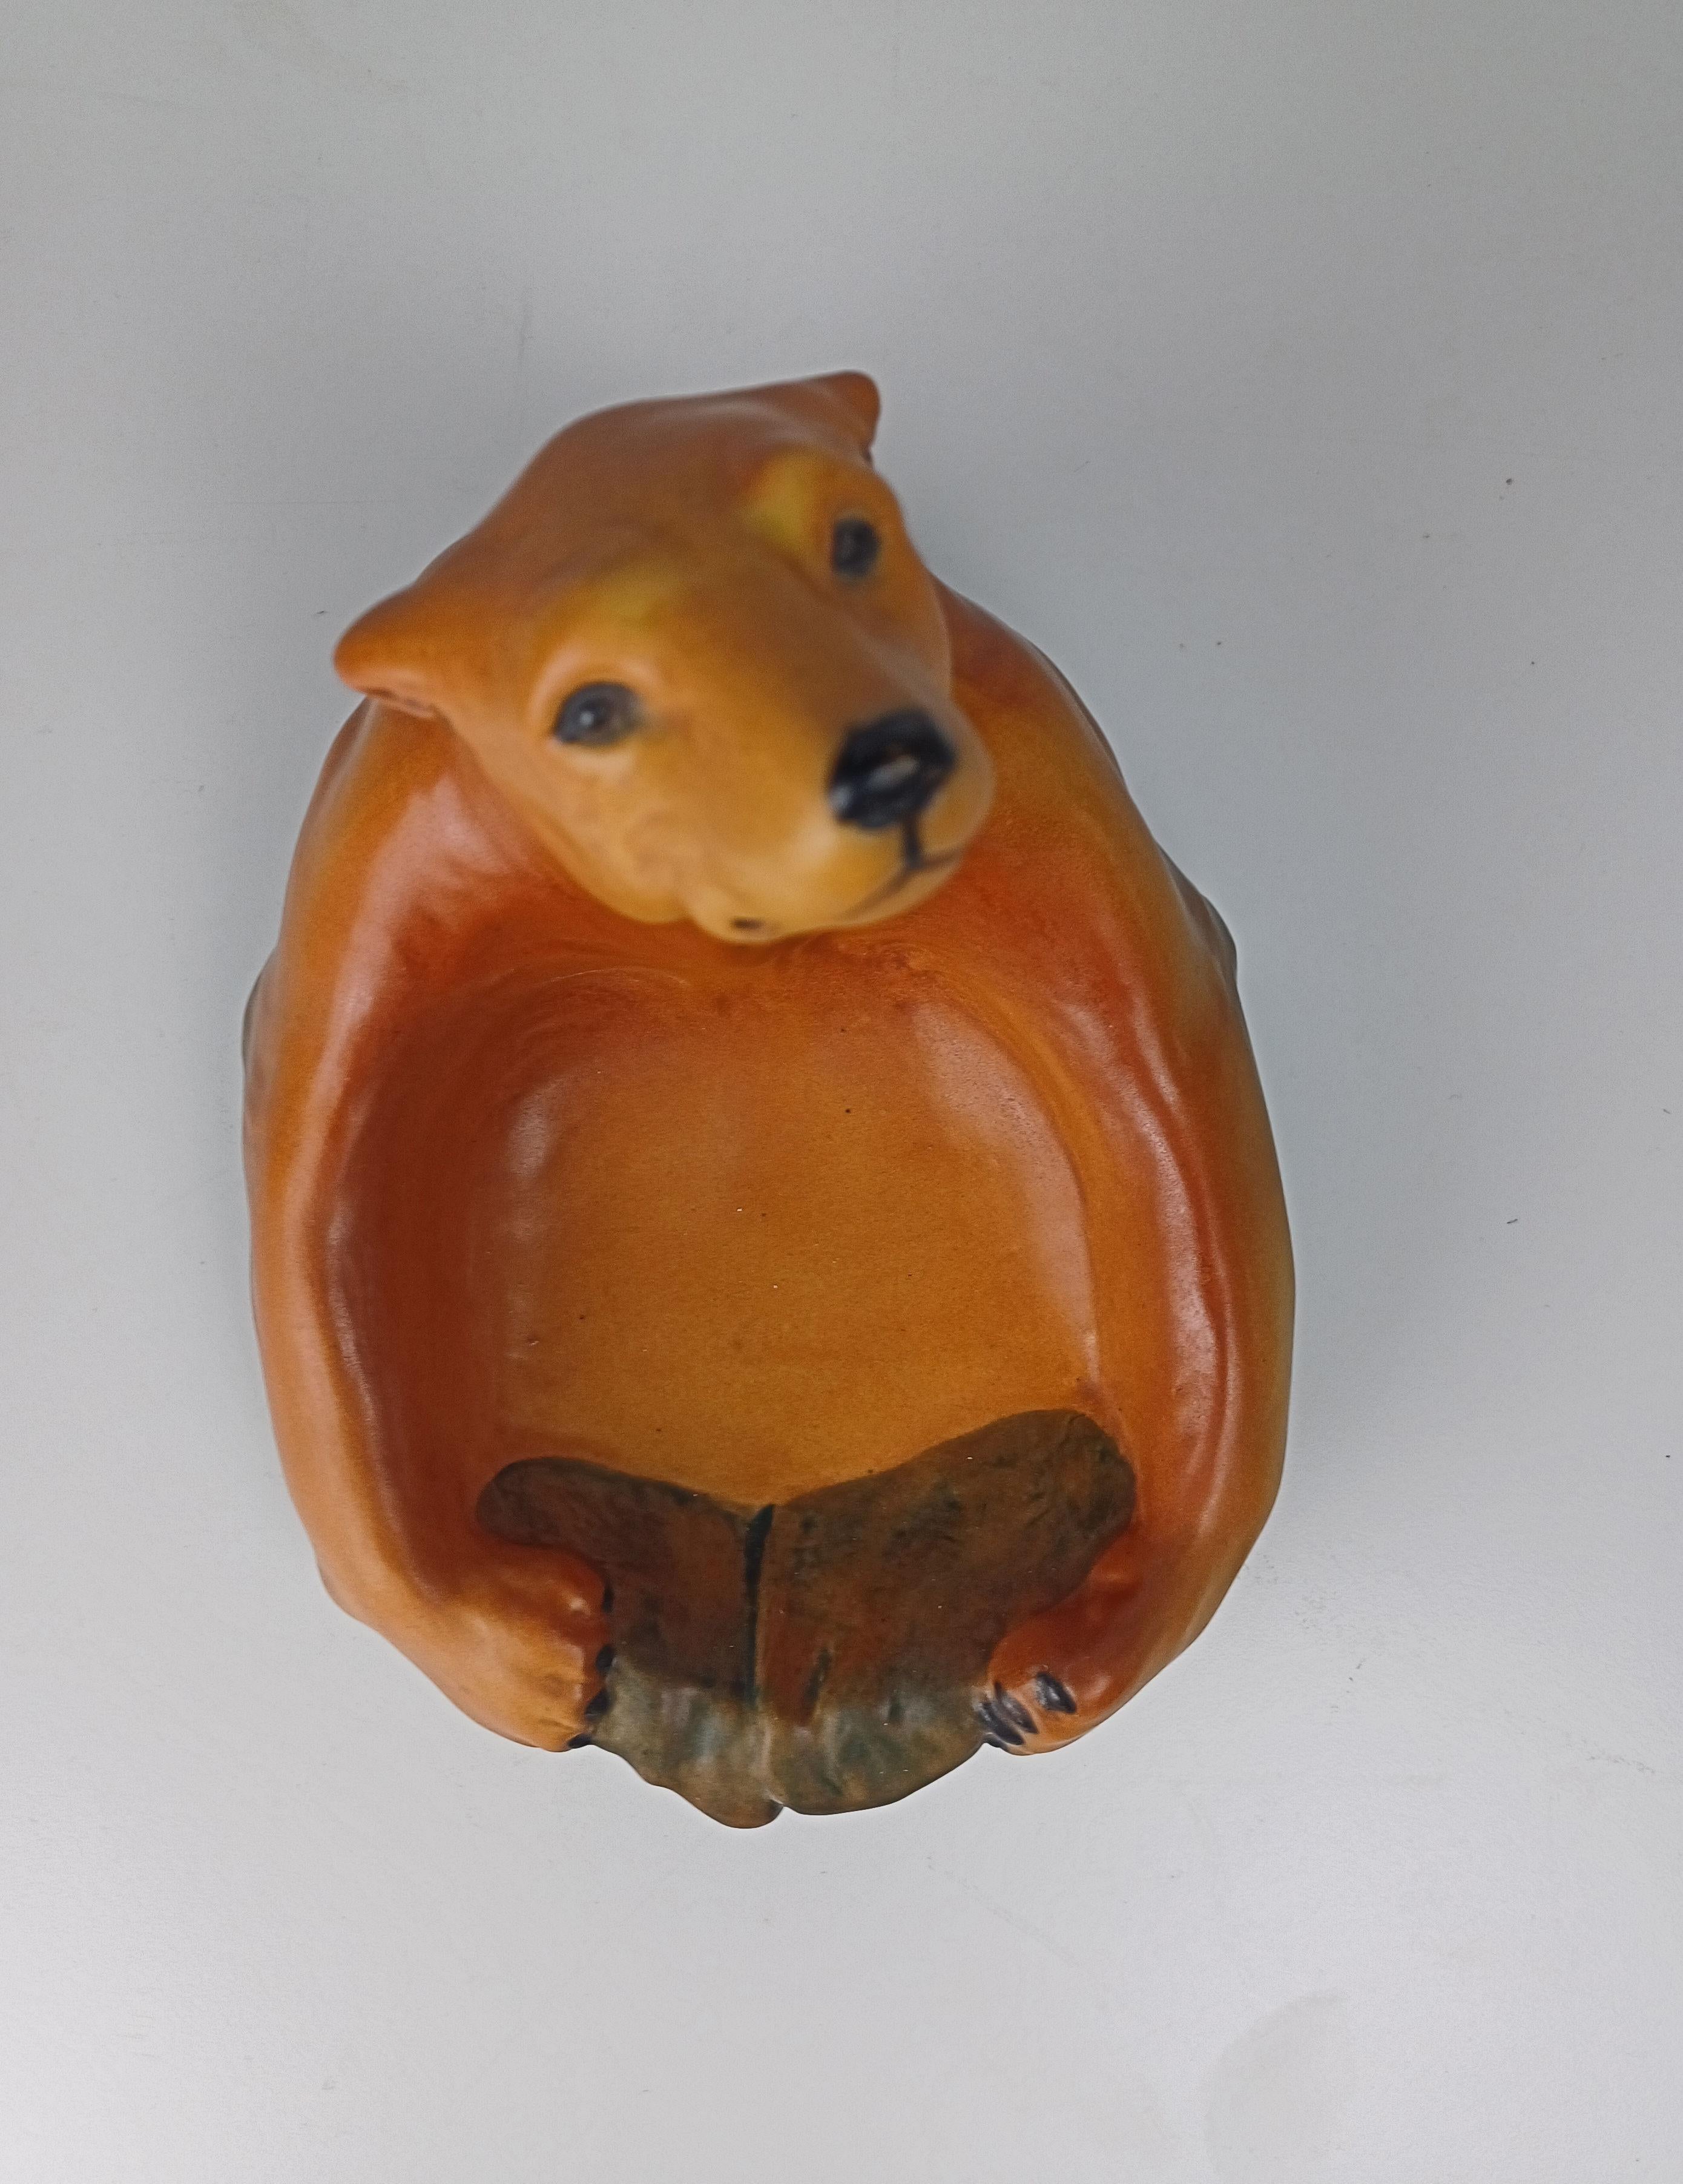 1920's Danish Art Nouveau Handcrafted Icebear Bowl - Ash Tray by P. Ipsens Enke For Sale 3